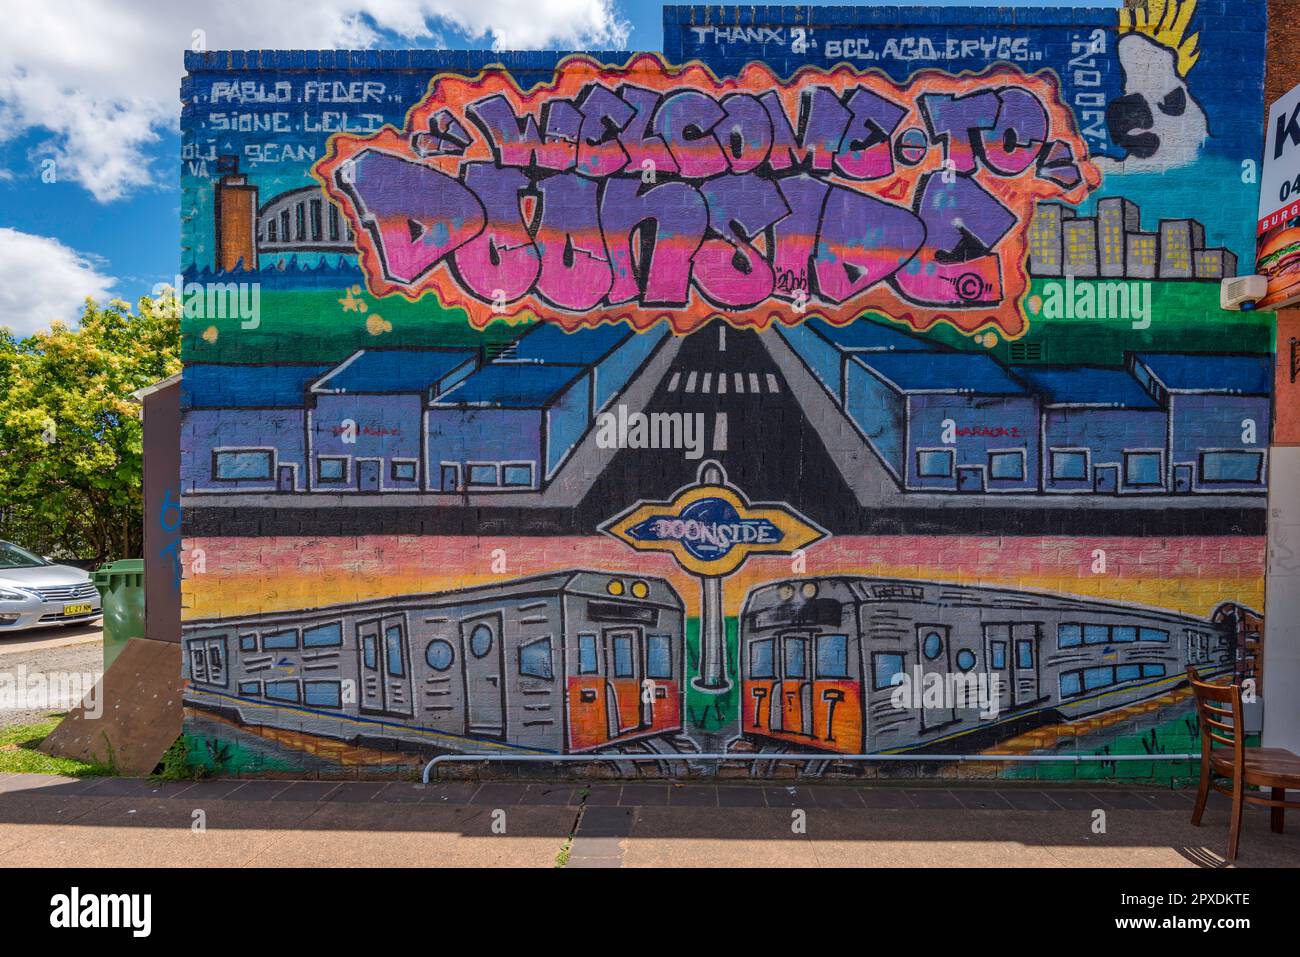 A 2002 mural artwork titled Welcome to Doonside Stock Photo